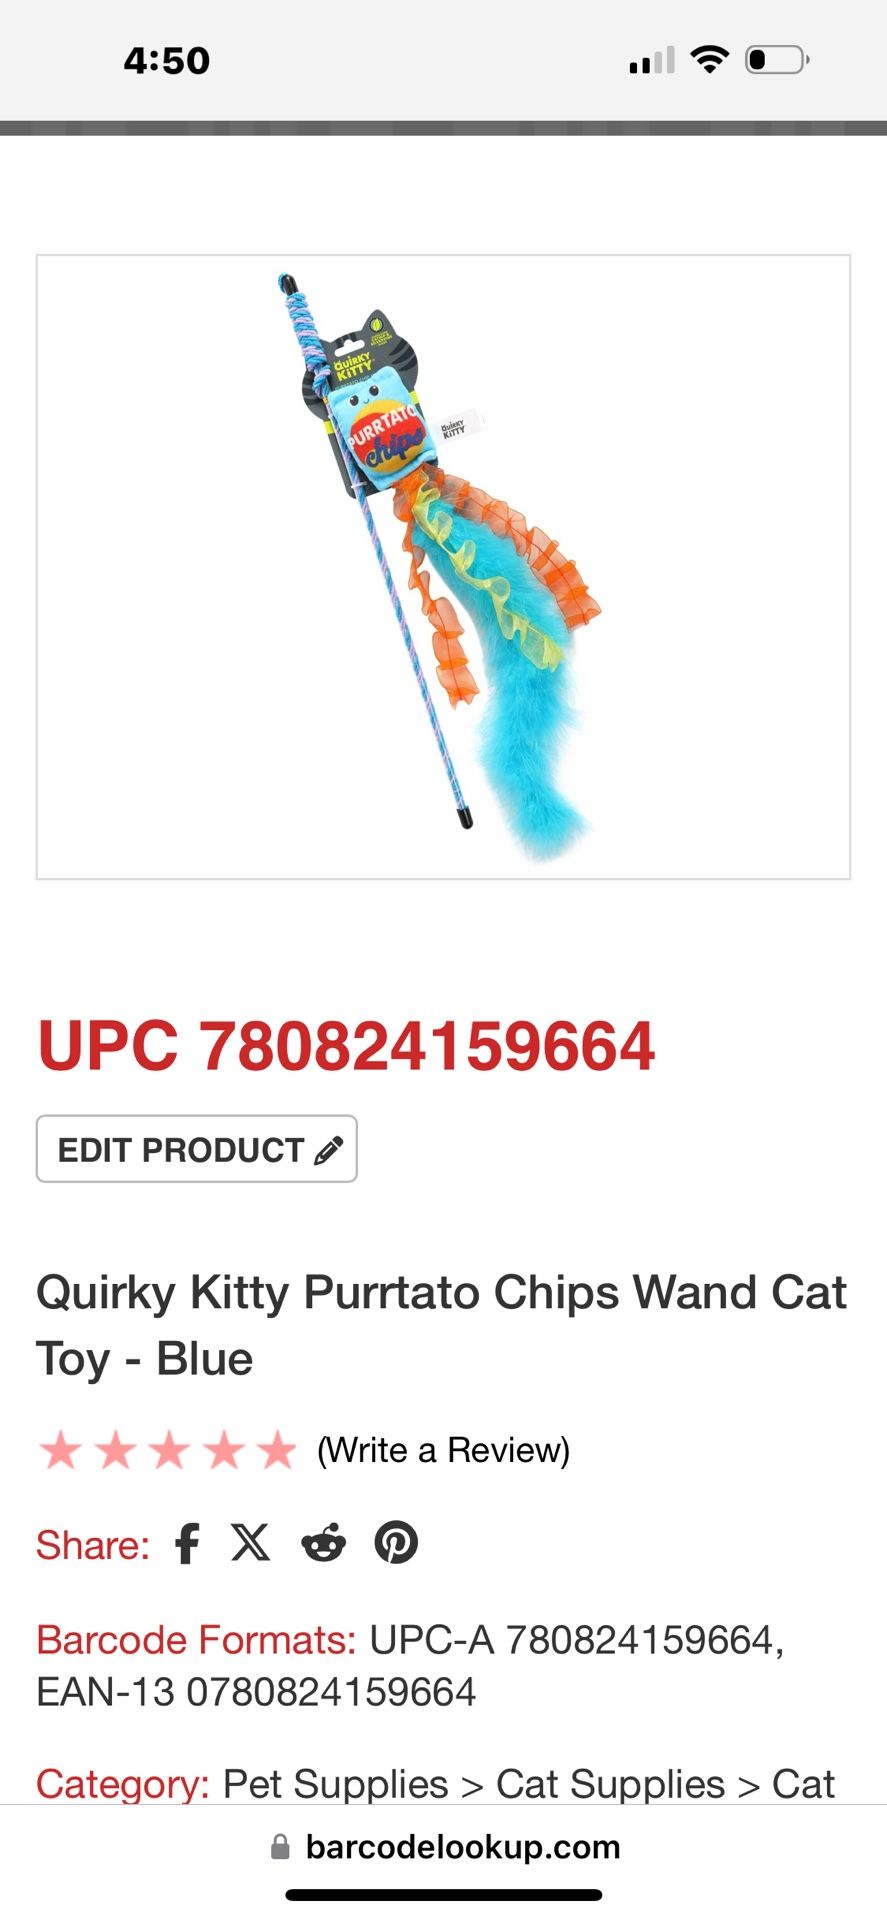 Quirky Kitty Purrtato Chips Wand Cat Toy - Blue